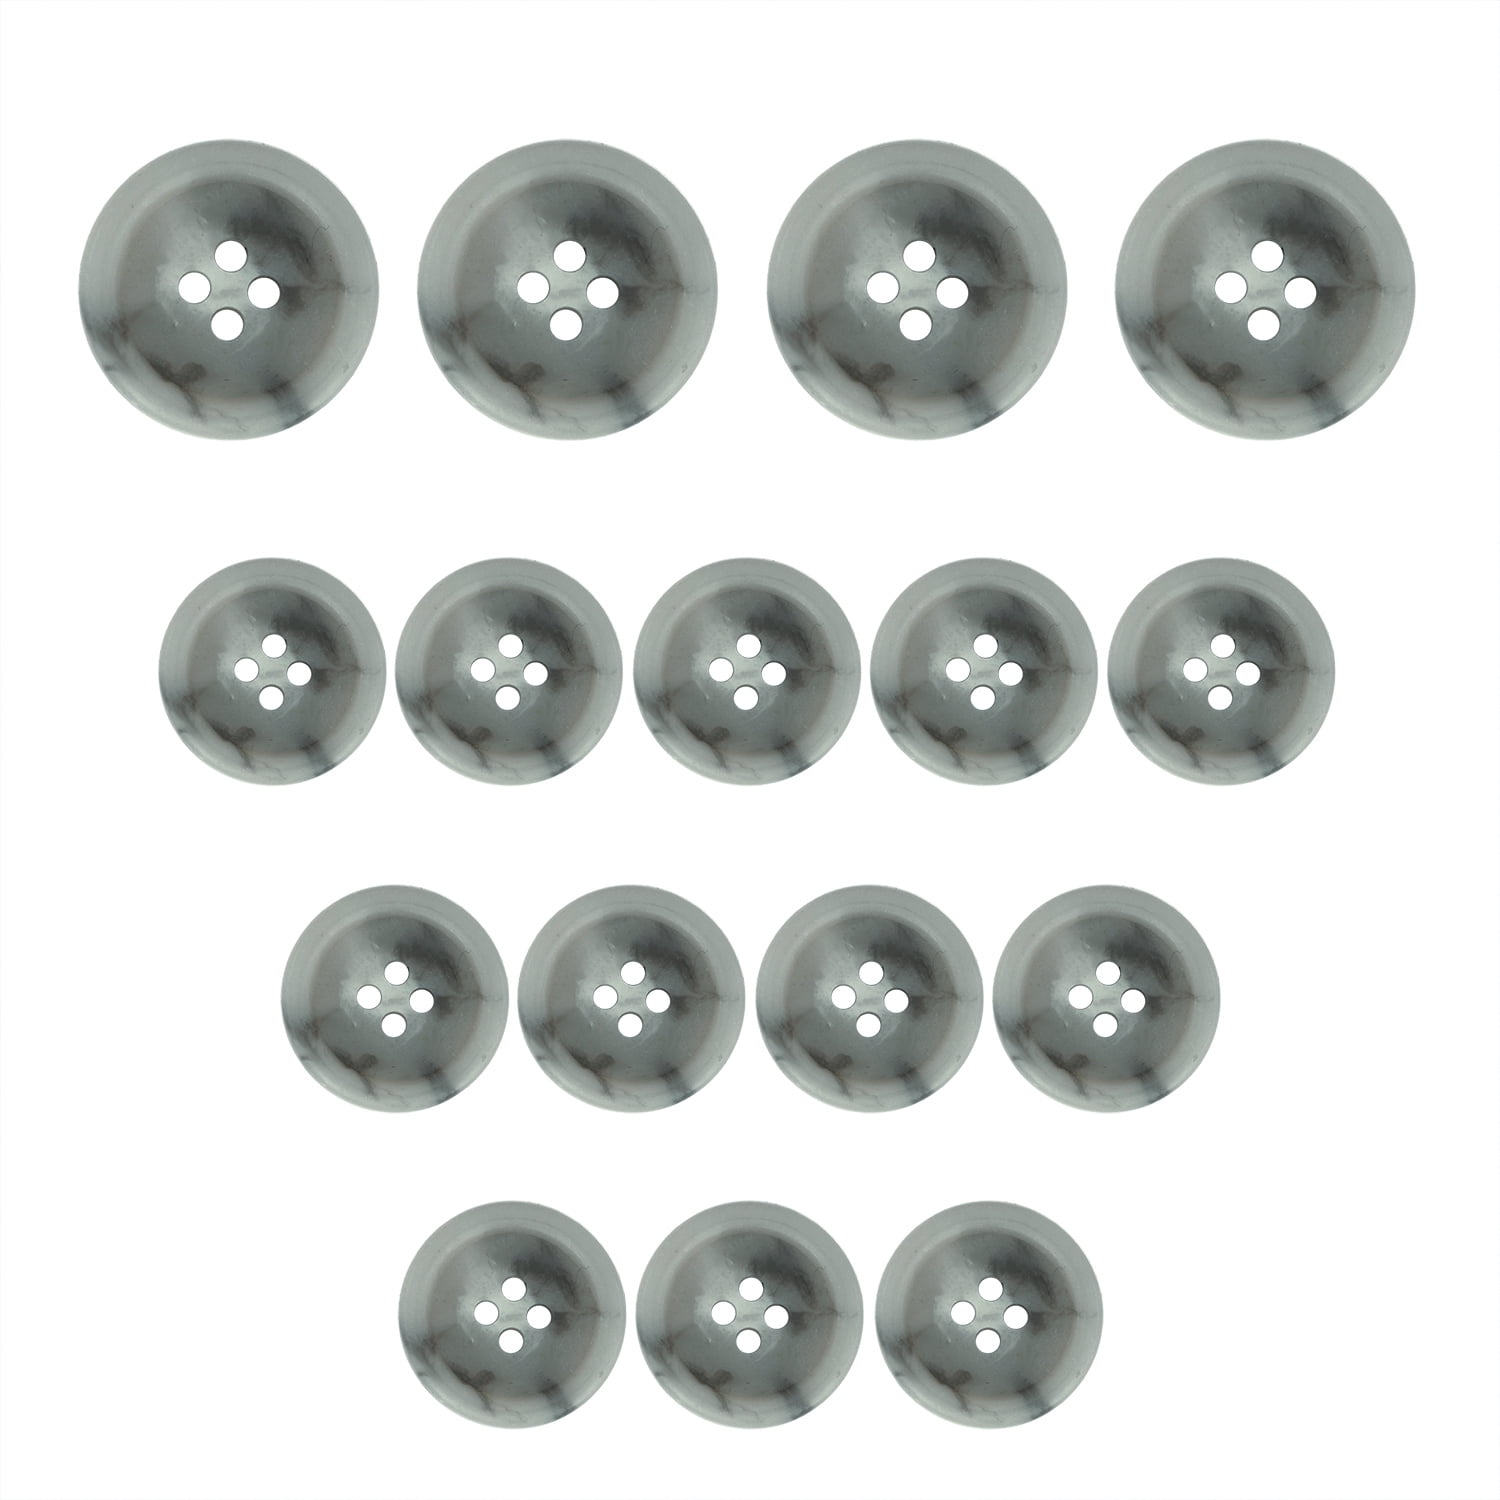 Buttonmode BU1/3/2CL Standard Shirt Buttons Full Set, White, 9mm, 10mm and 12mm (0.35, 0.39 and 0.47 inch) 16-Buttons (8 Front, 4 Sleeve, 4 Collar)